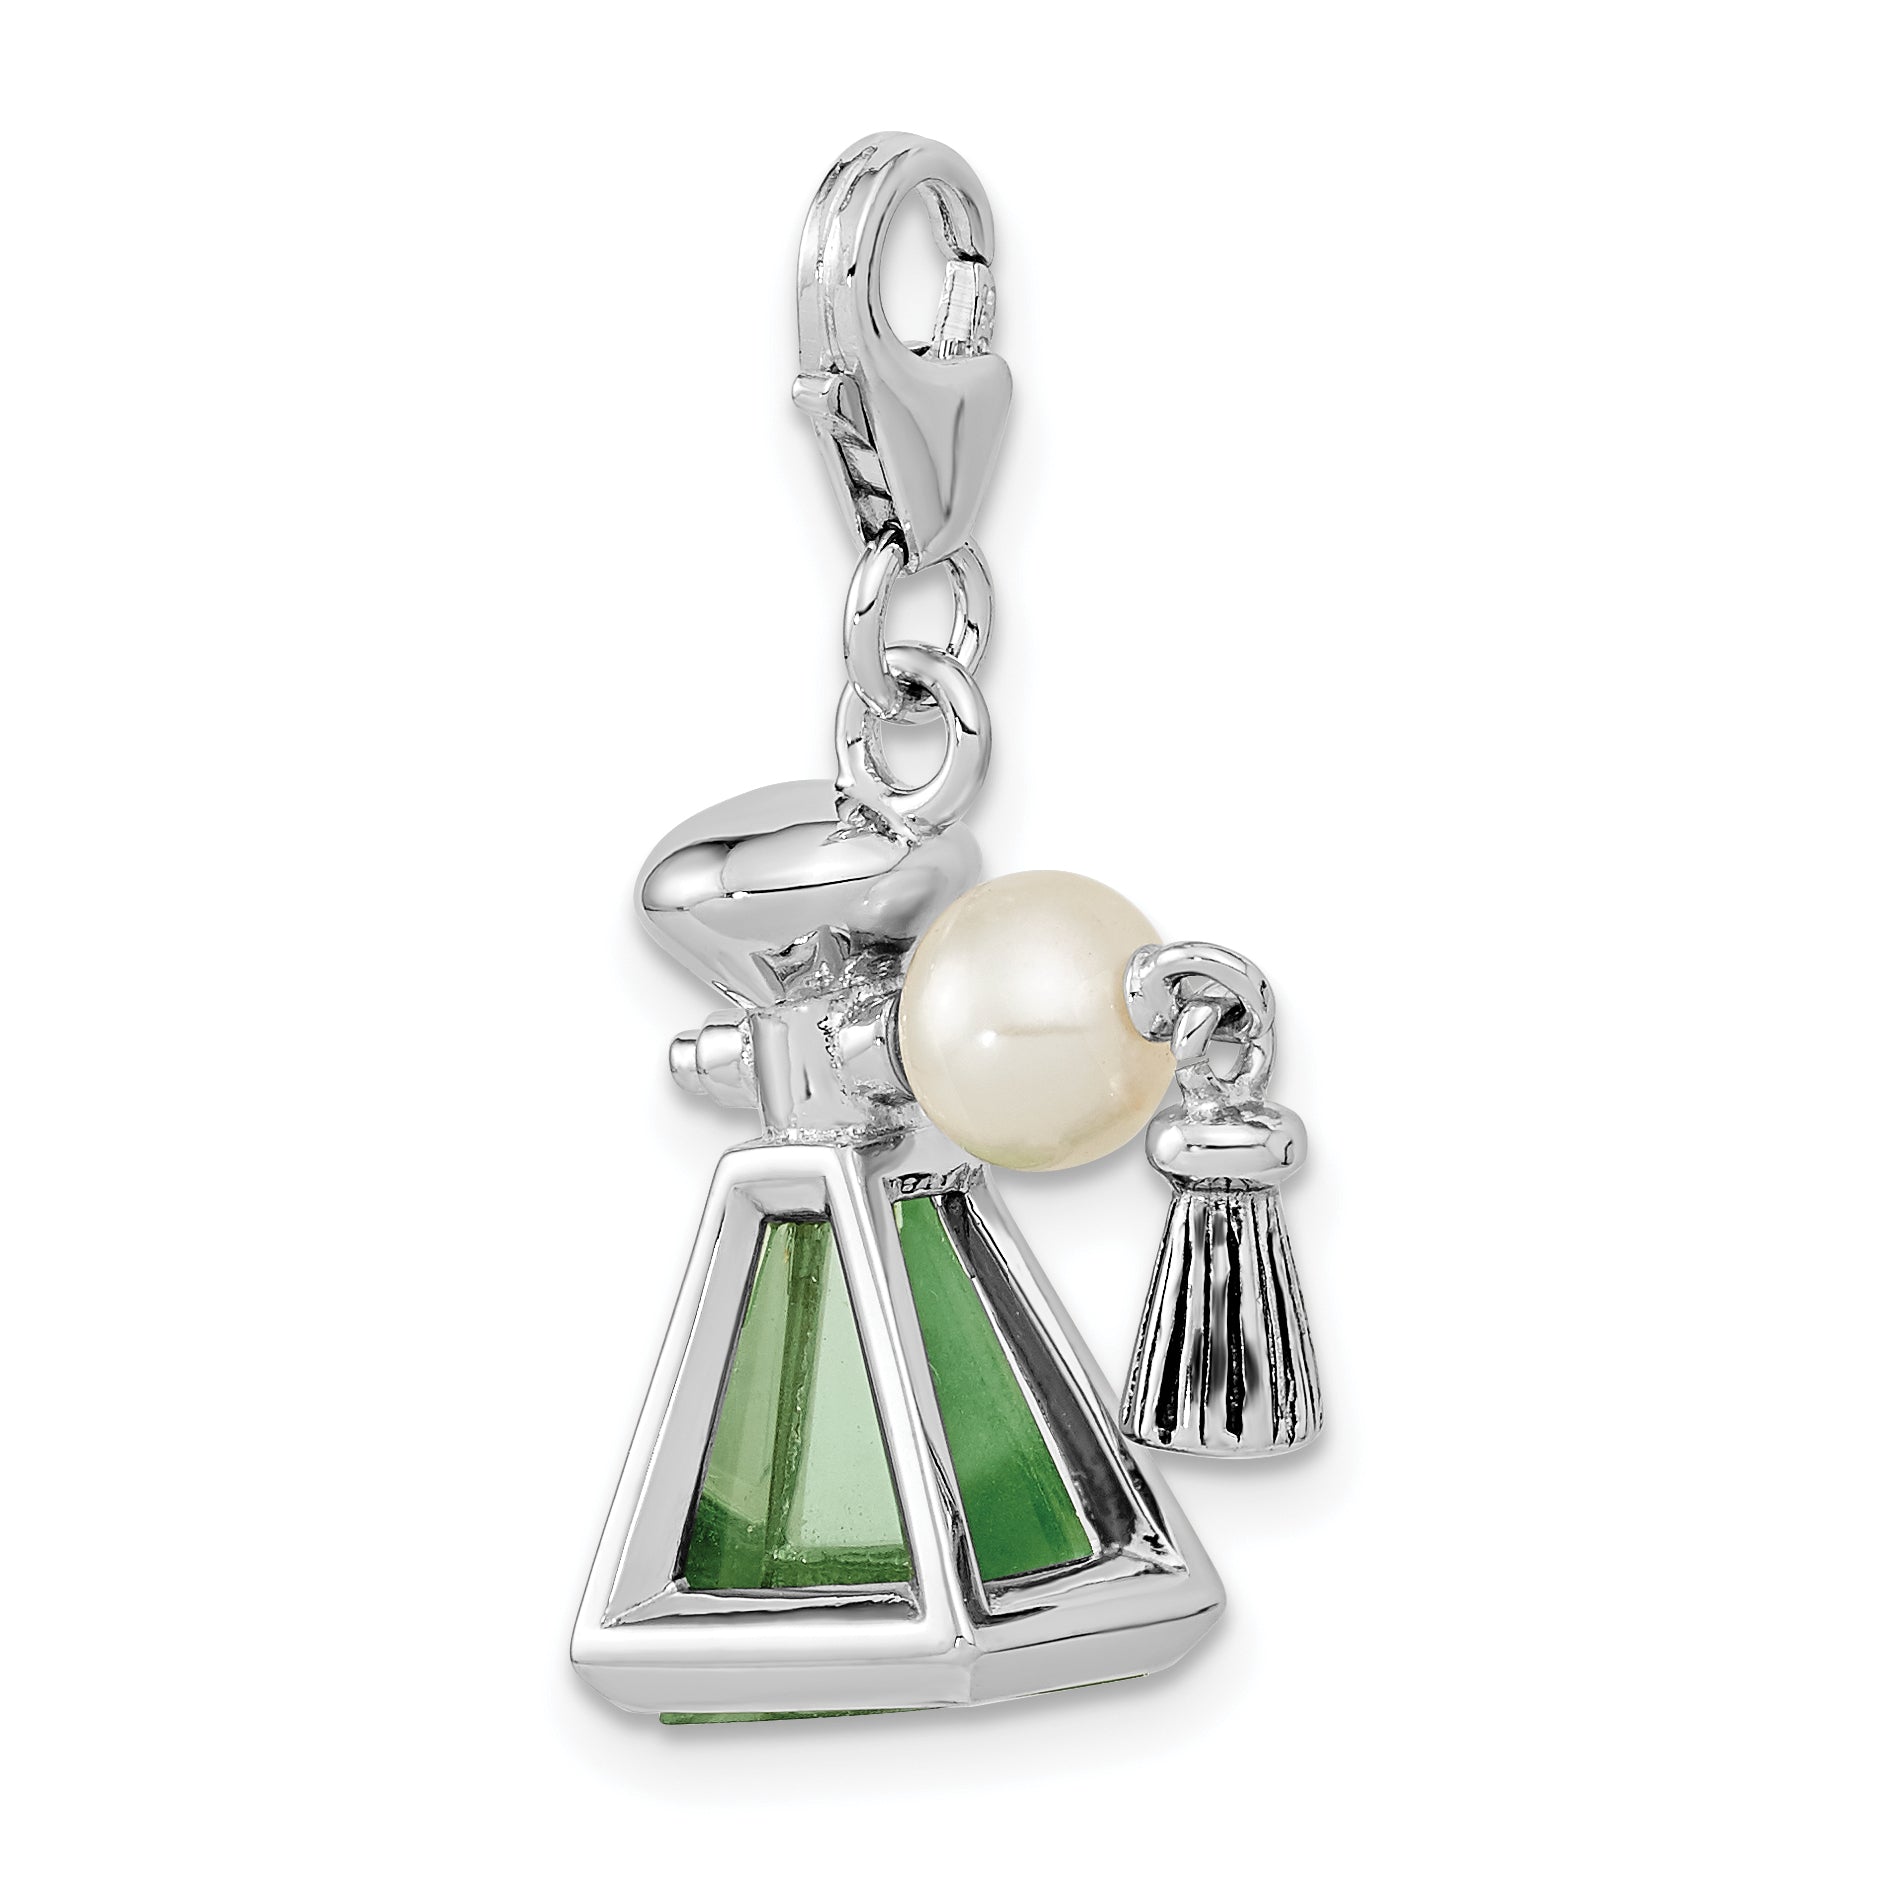 Amore La Vita Sterling Silver Rhodium-plated Polished 3-D Perfume Freshwater Cultured Pearl Perfume Bottle Charm with Fancy Lobster Clasp